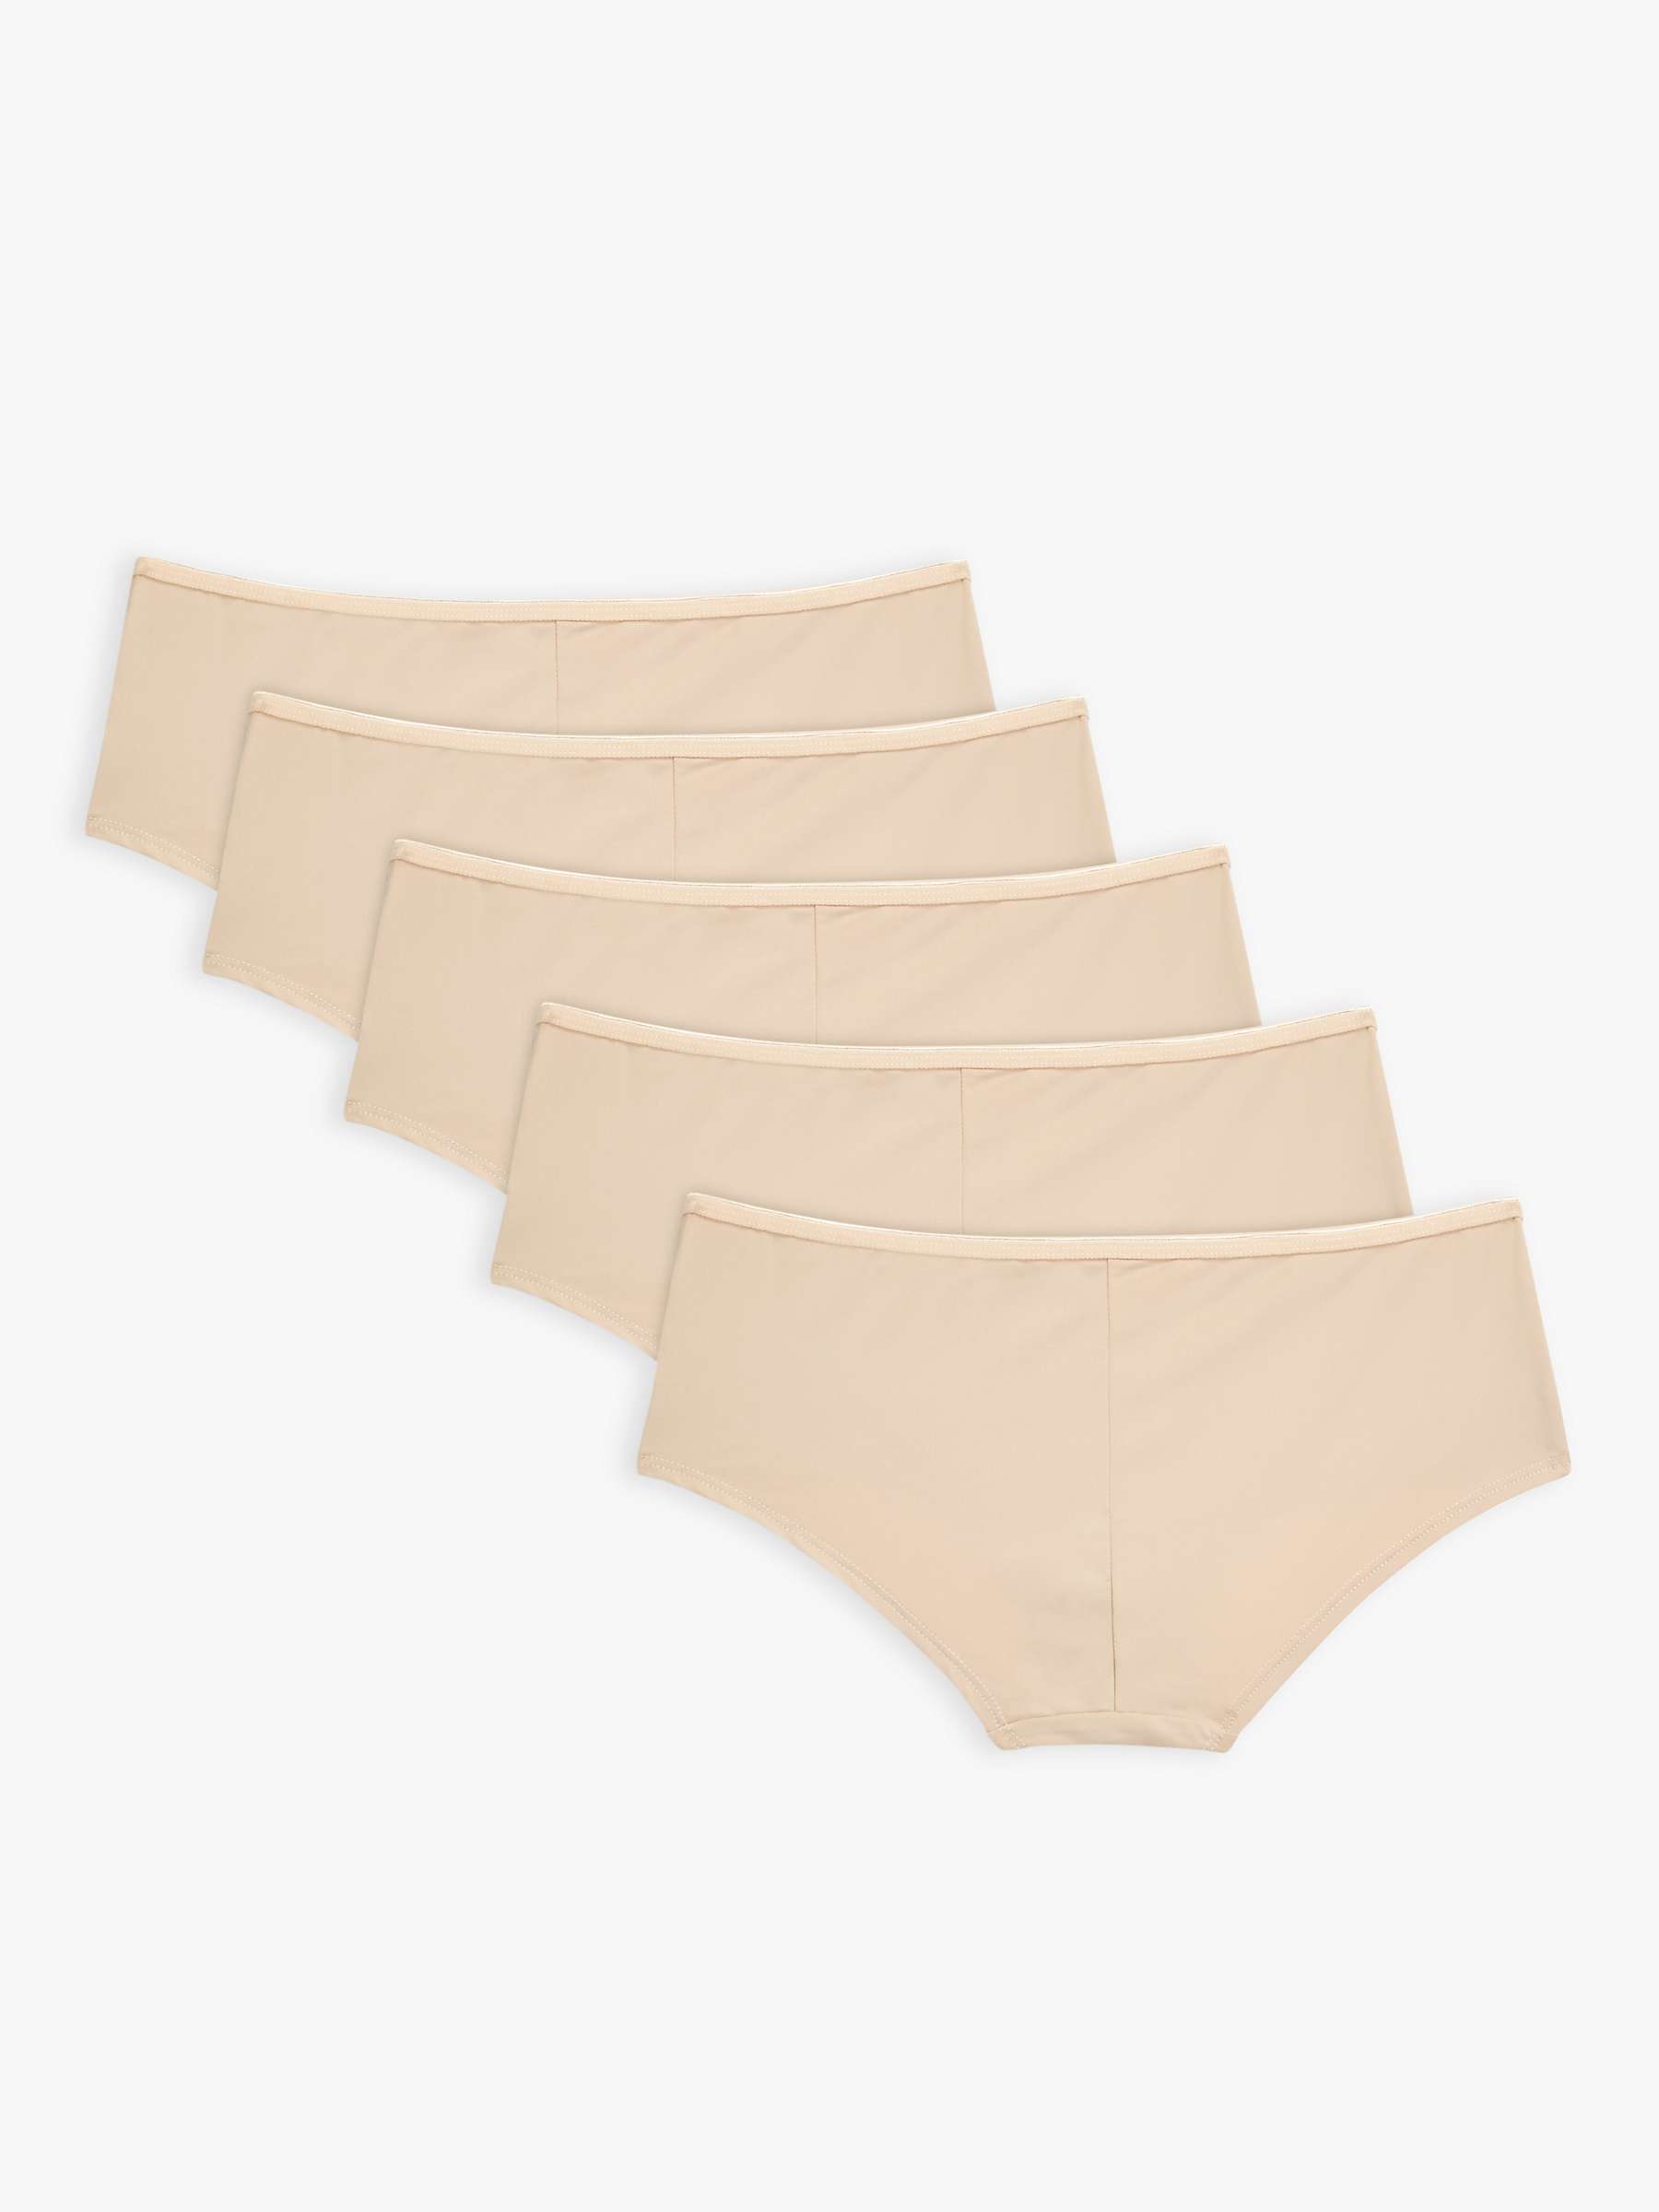 Buy John Lewis ANYDAY Microfibre Short Knickers, Pack of 5 Online at johnlewis.com